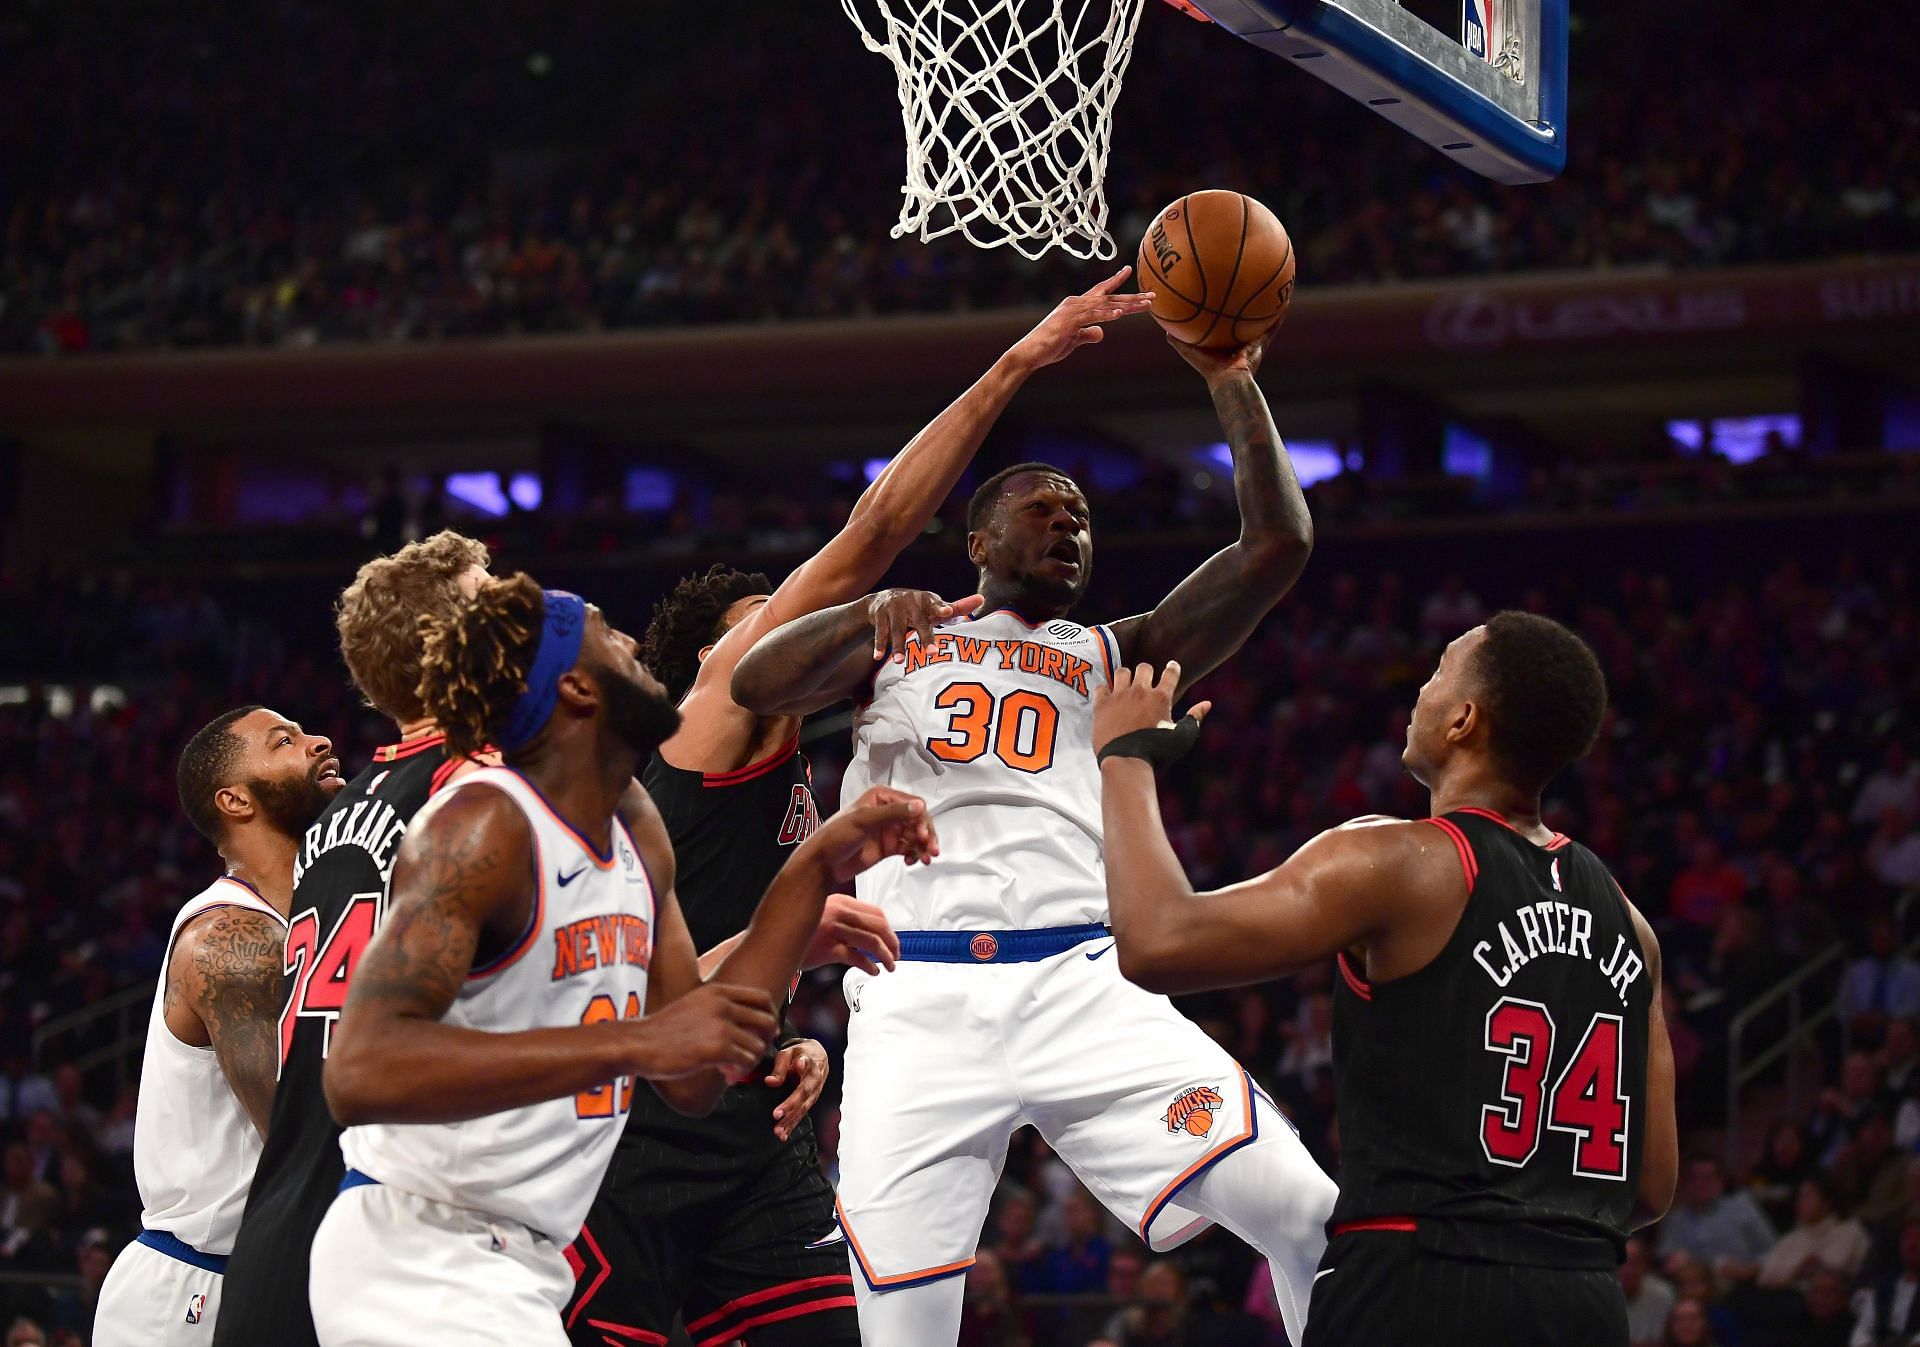 The Chicago Bulls will look to host the New York Knicks on November 21st